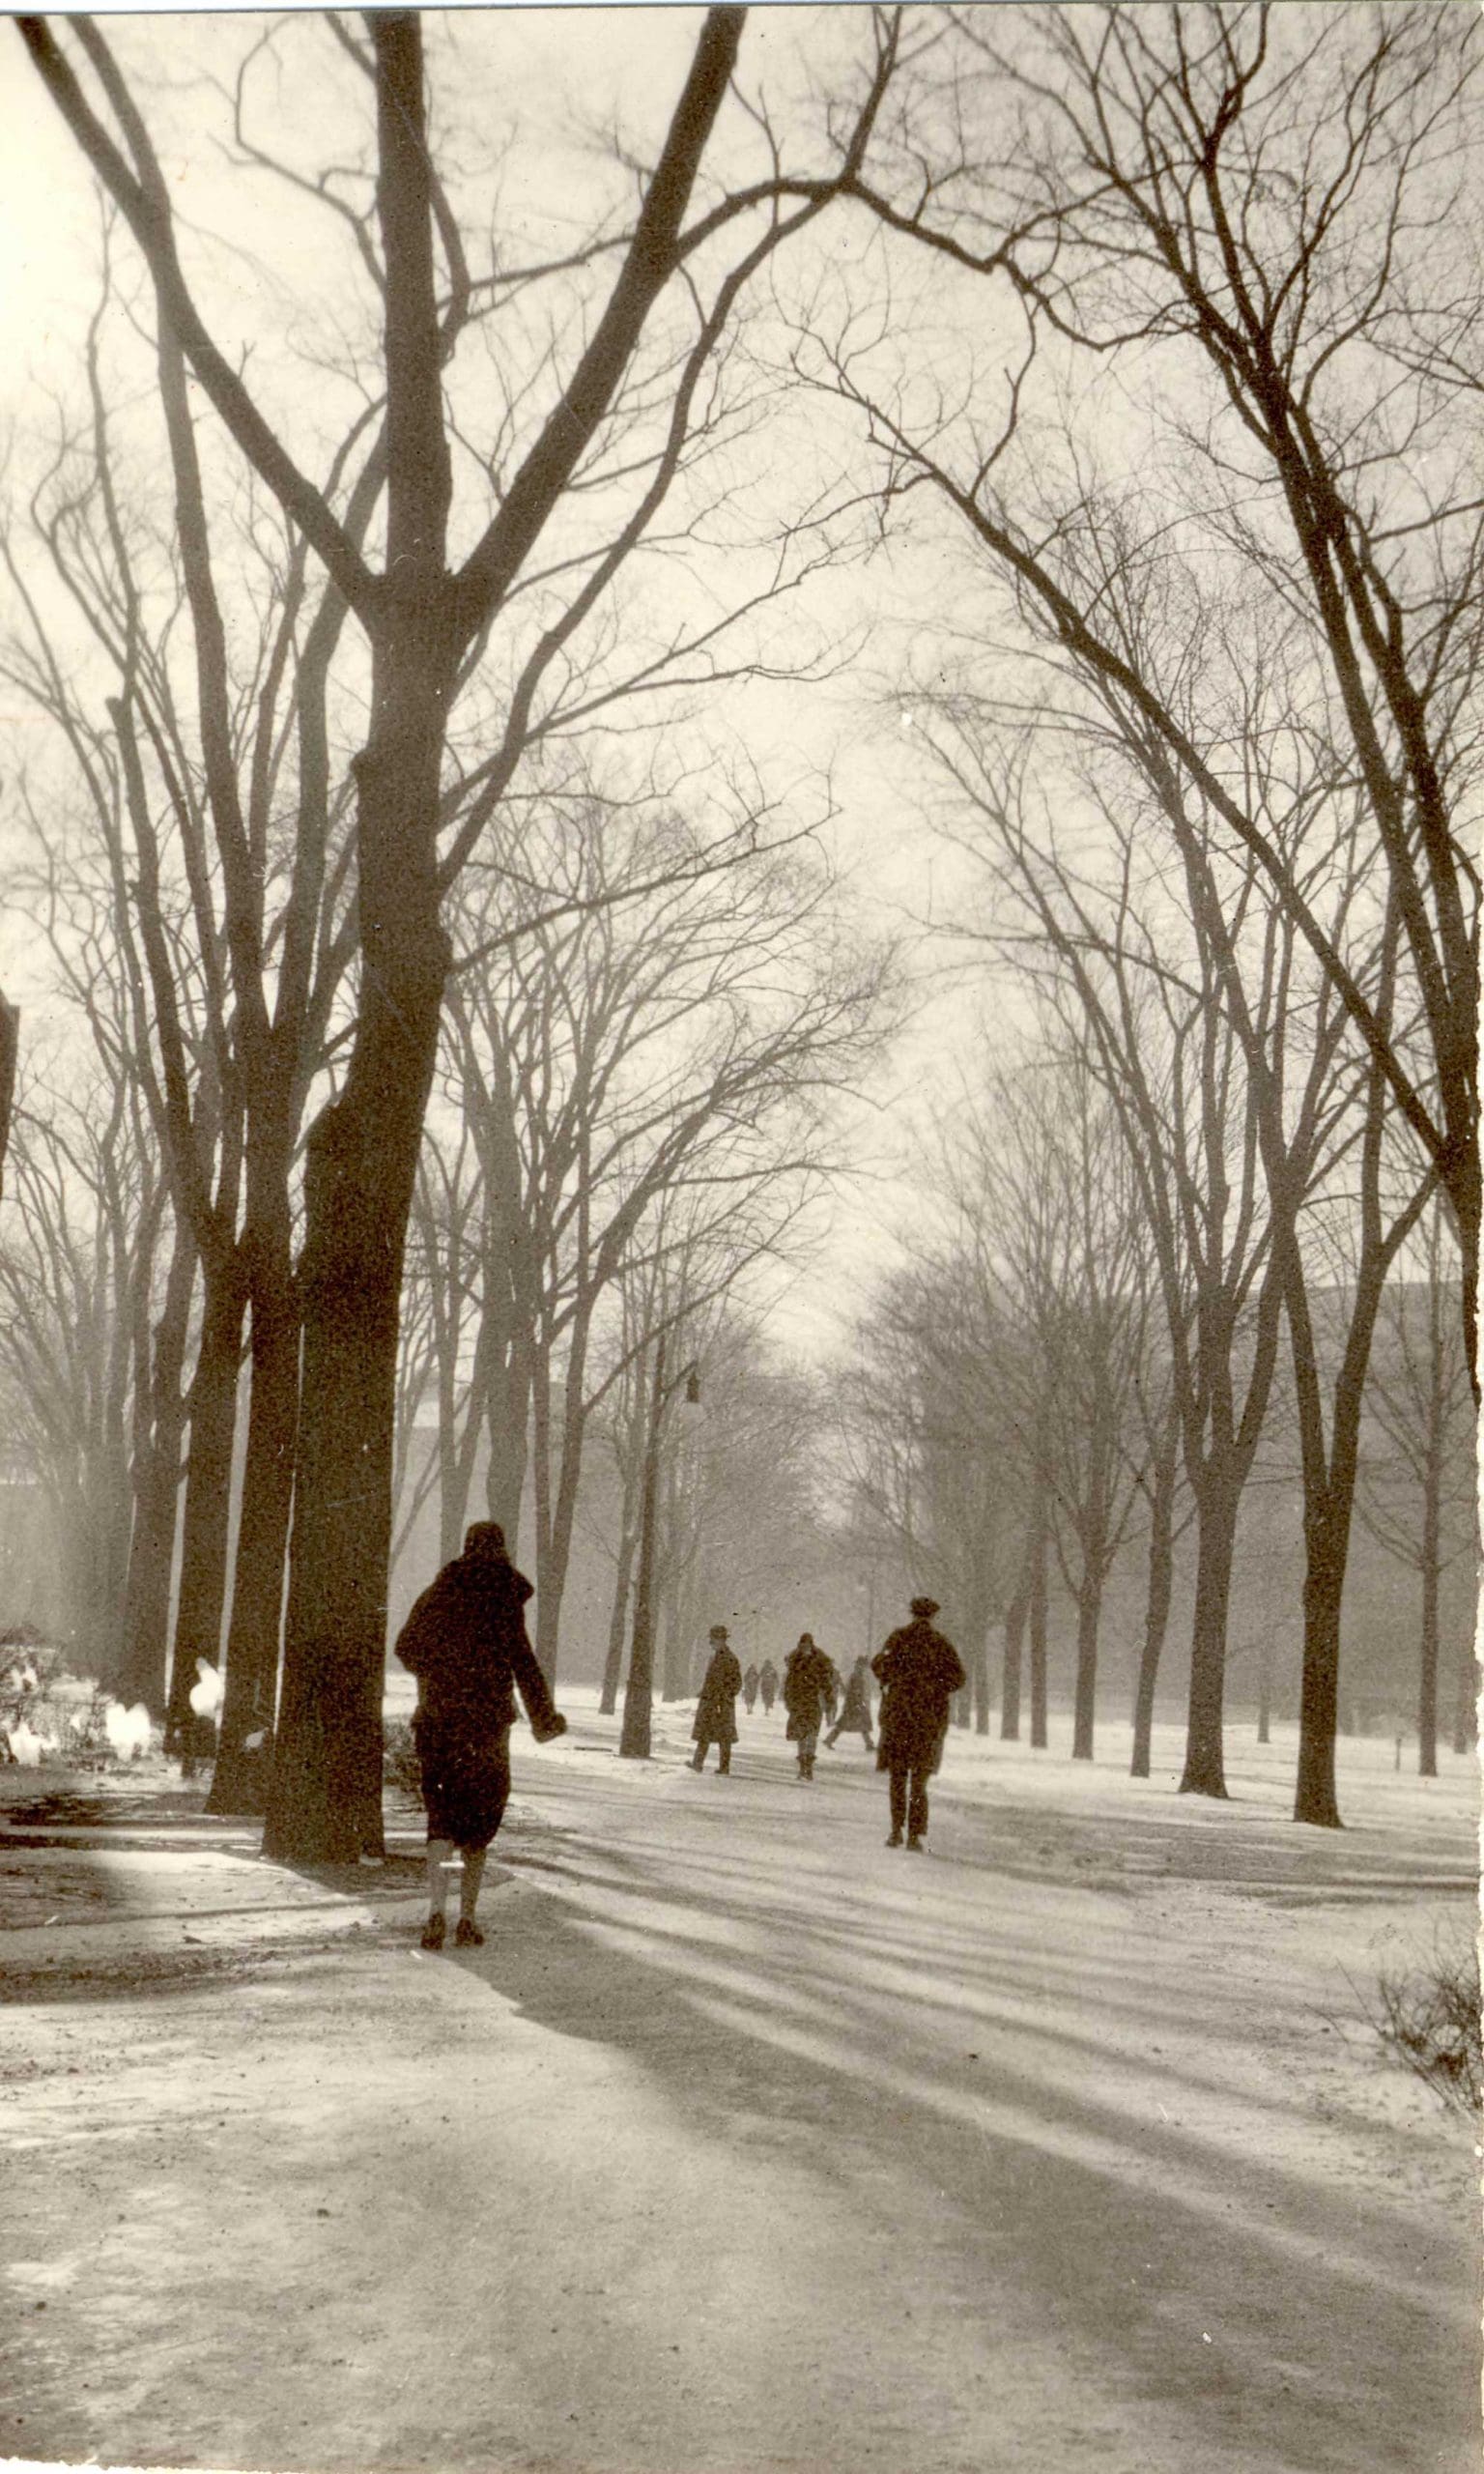 People crossing a snowy street corner on the Ann Arbor campus.